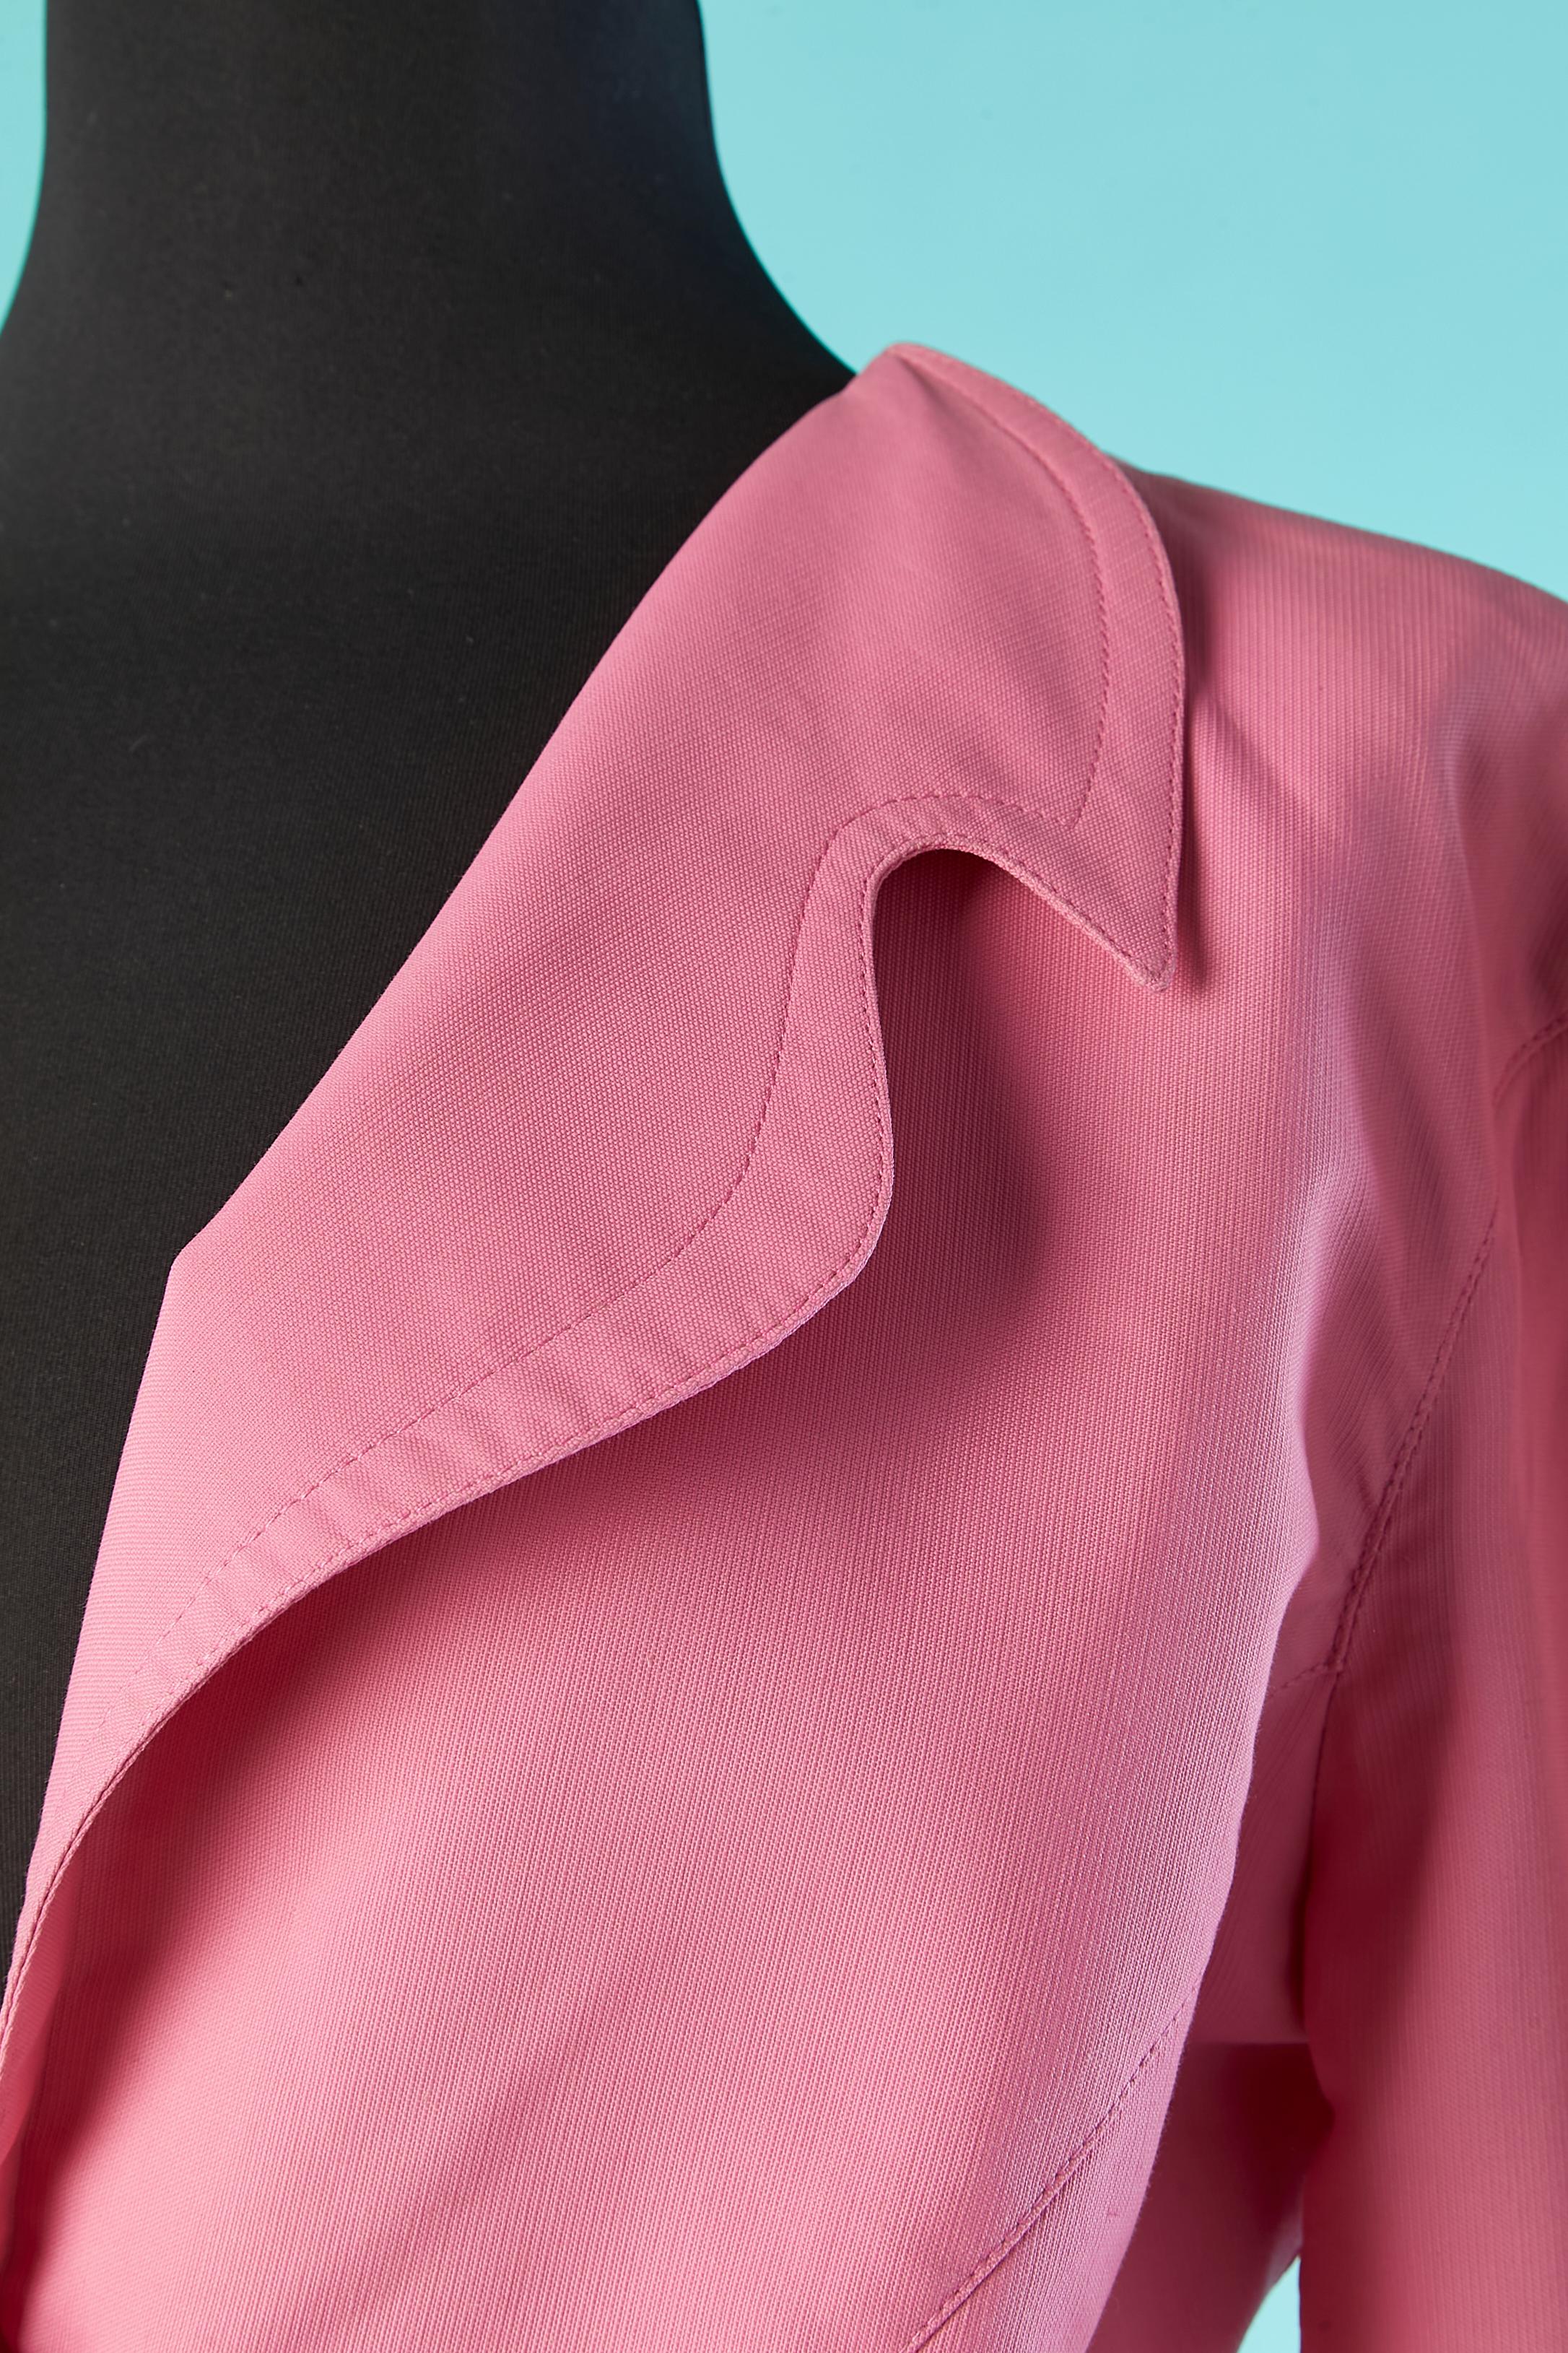 Pink skirt-suit with asymmetrical collar. Main fabric composition: 45% cotton, 55% rayon. No lining. 
Snap closure in the middle front and cut-work. 
SIZE M 